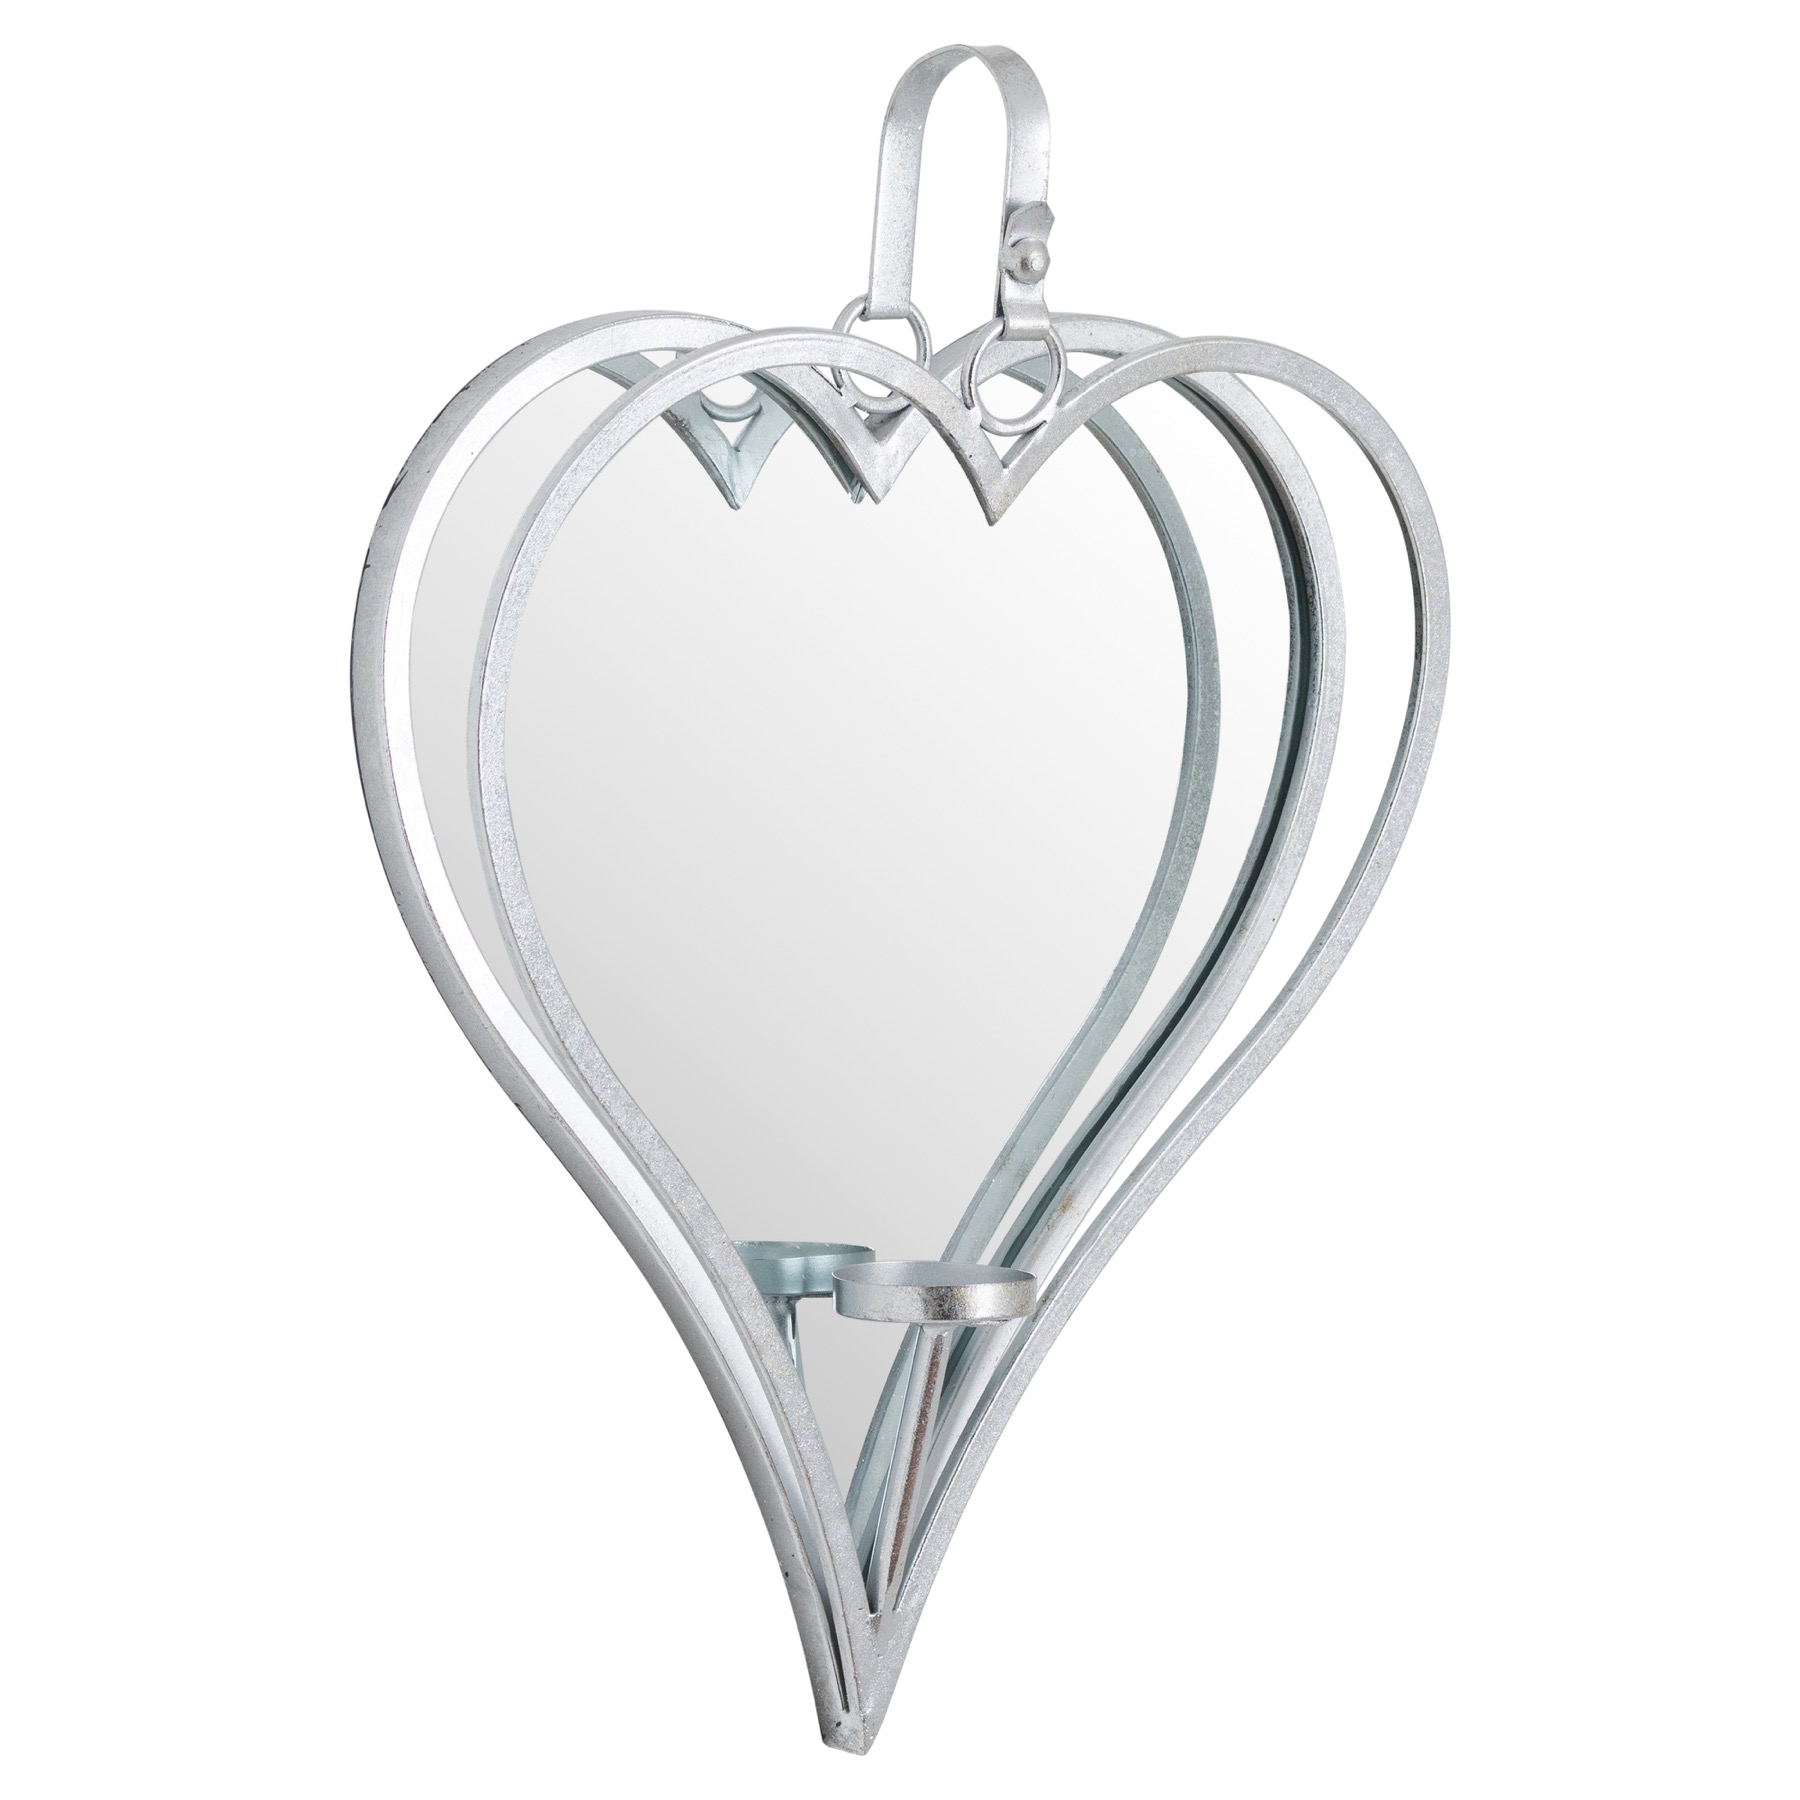 Large Silver Mirrored Heart Candle Holder - Image 1